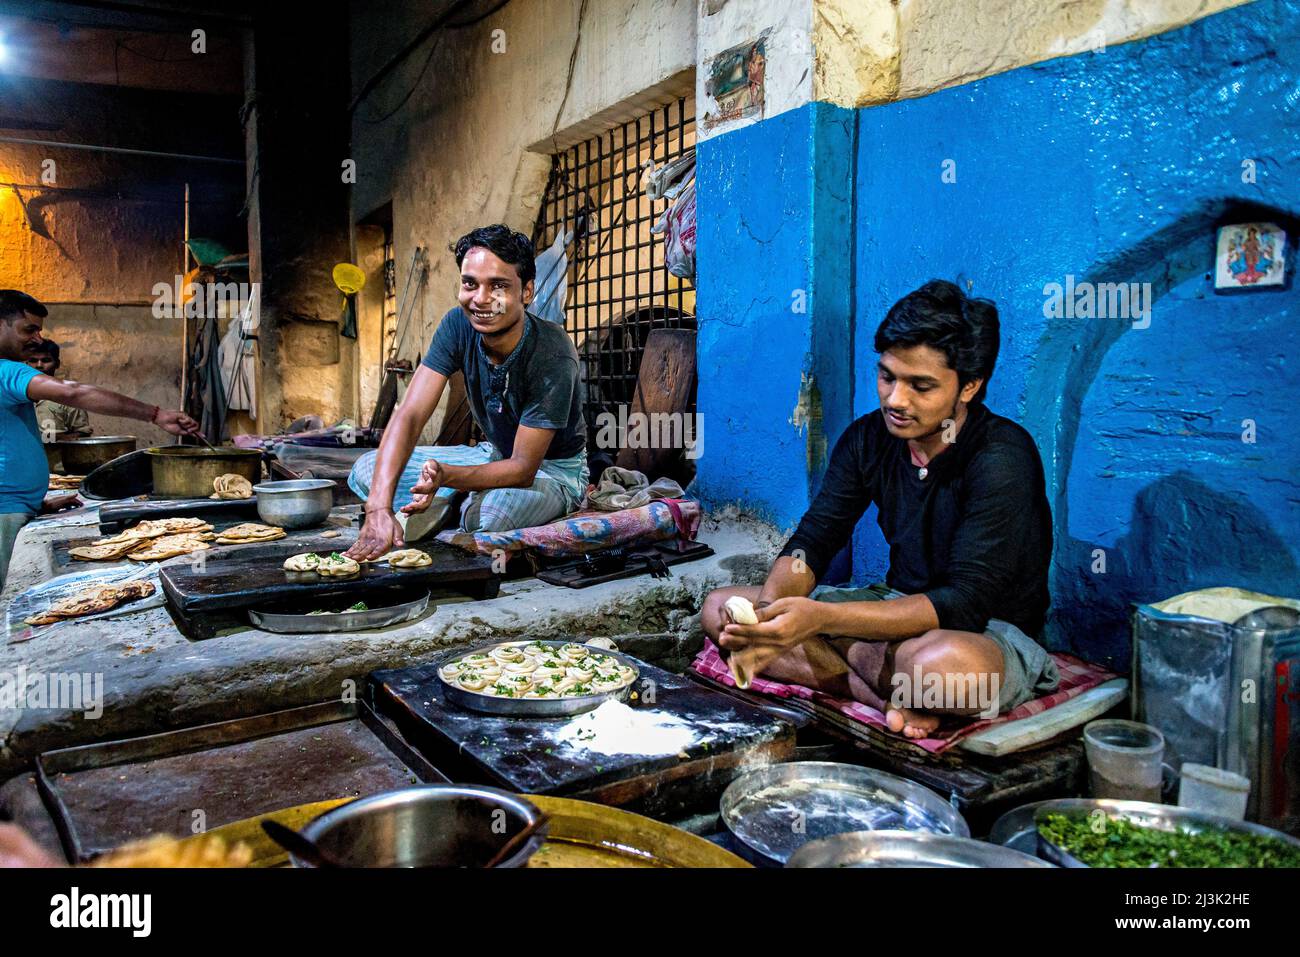 Young men working in a commercial kitchen preparing food under lights in India; Amritsar, Punjab, India Stock Photo